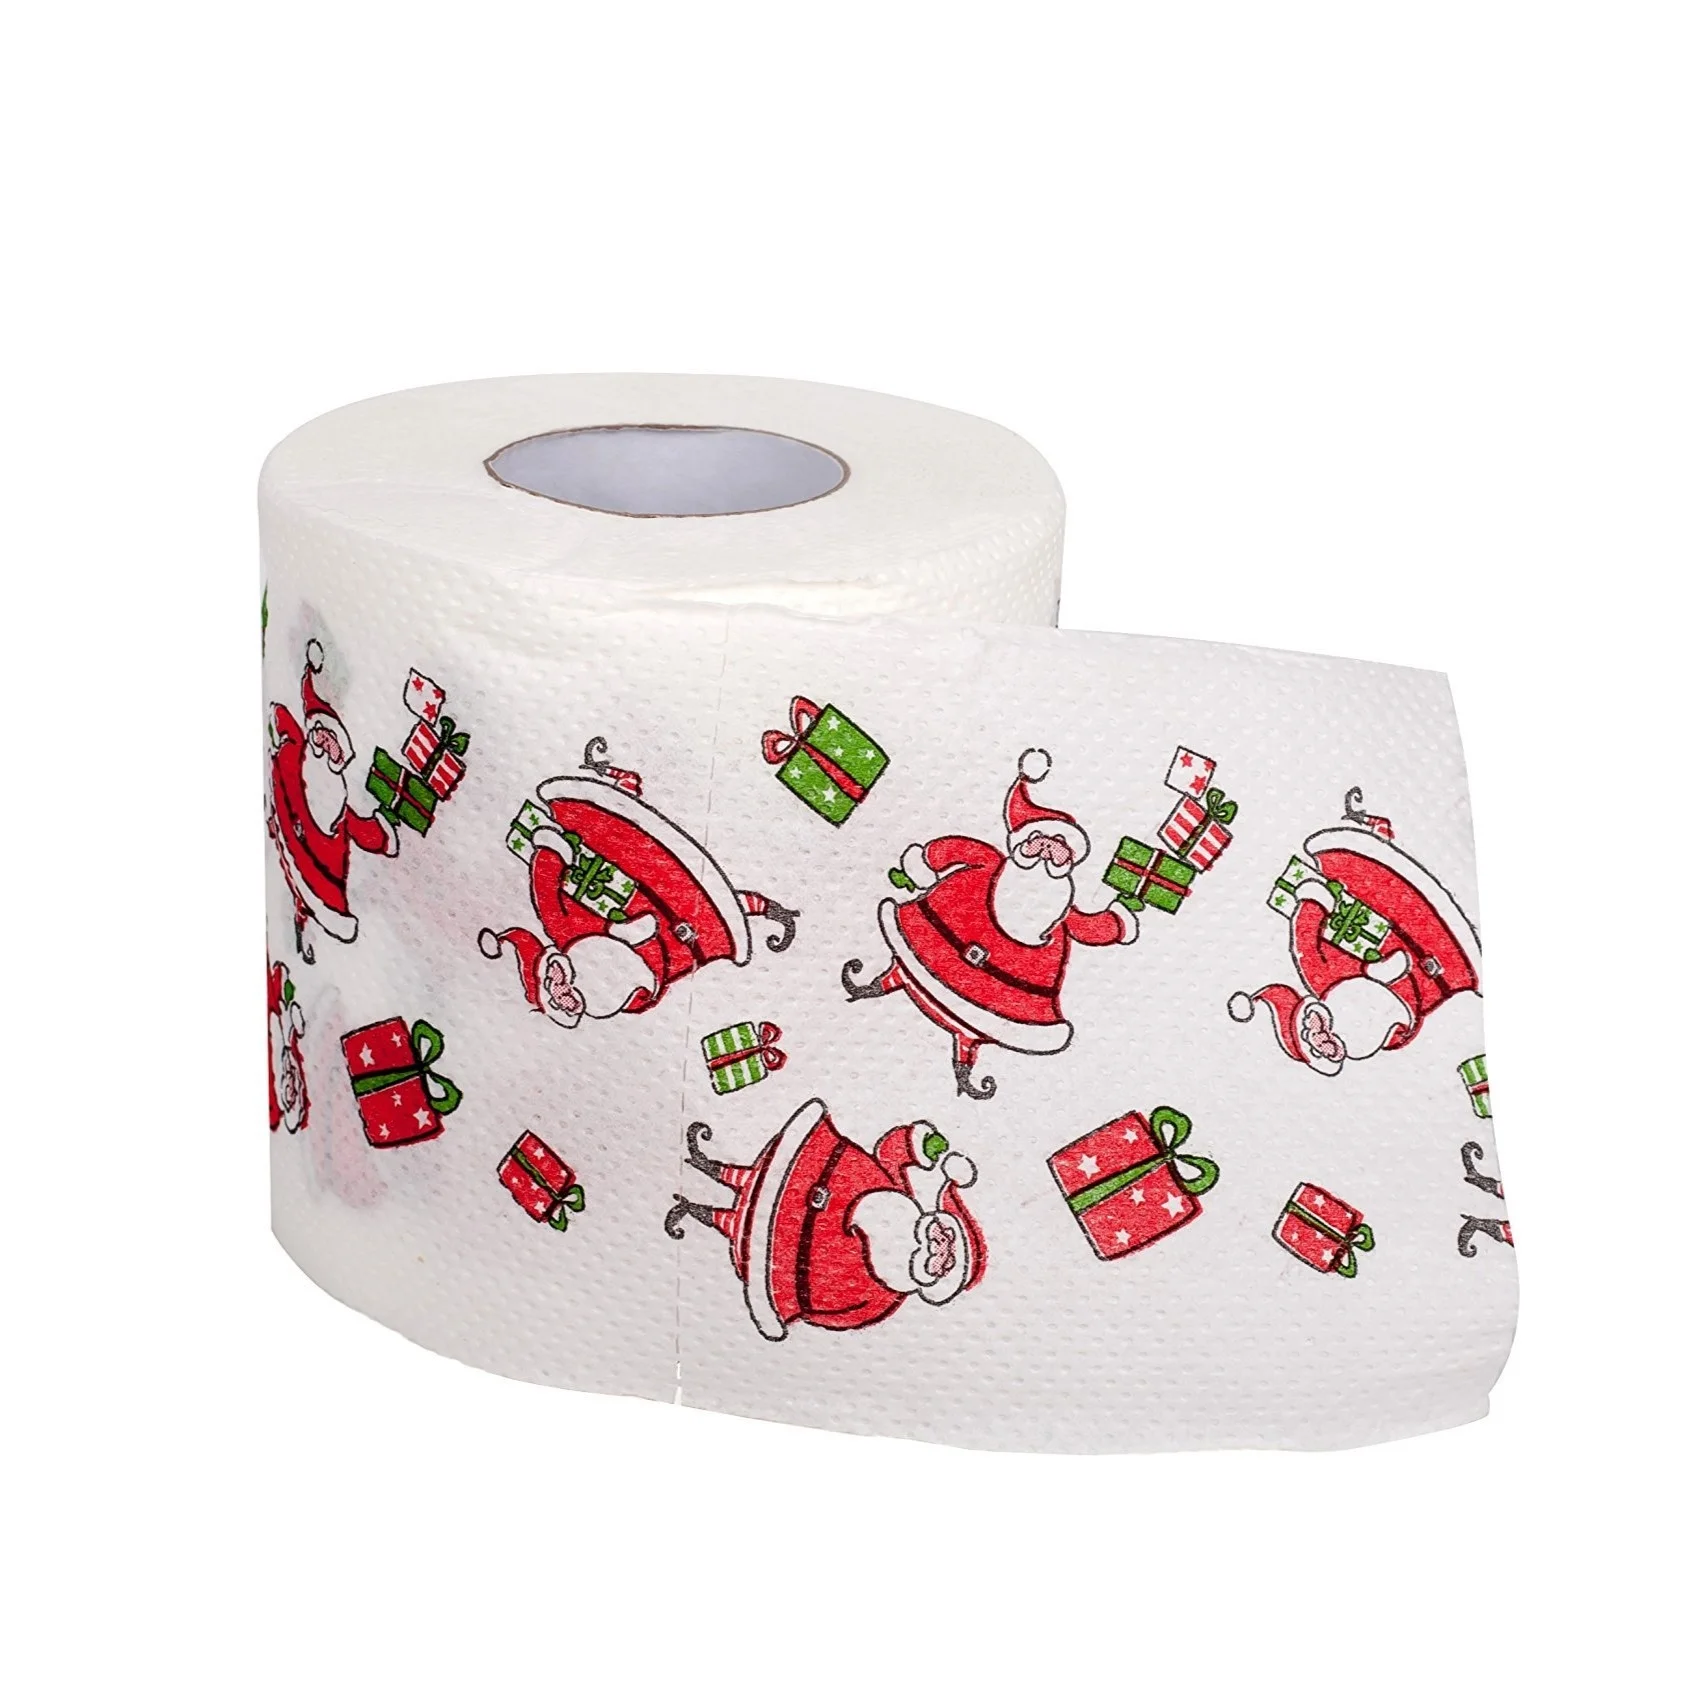 Virgin Wood Pulp Material Customized Printing Toilet Paper Roll with Christmas Pattern Design